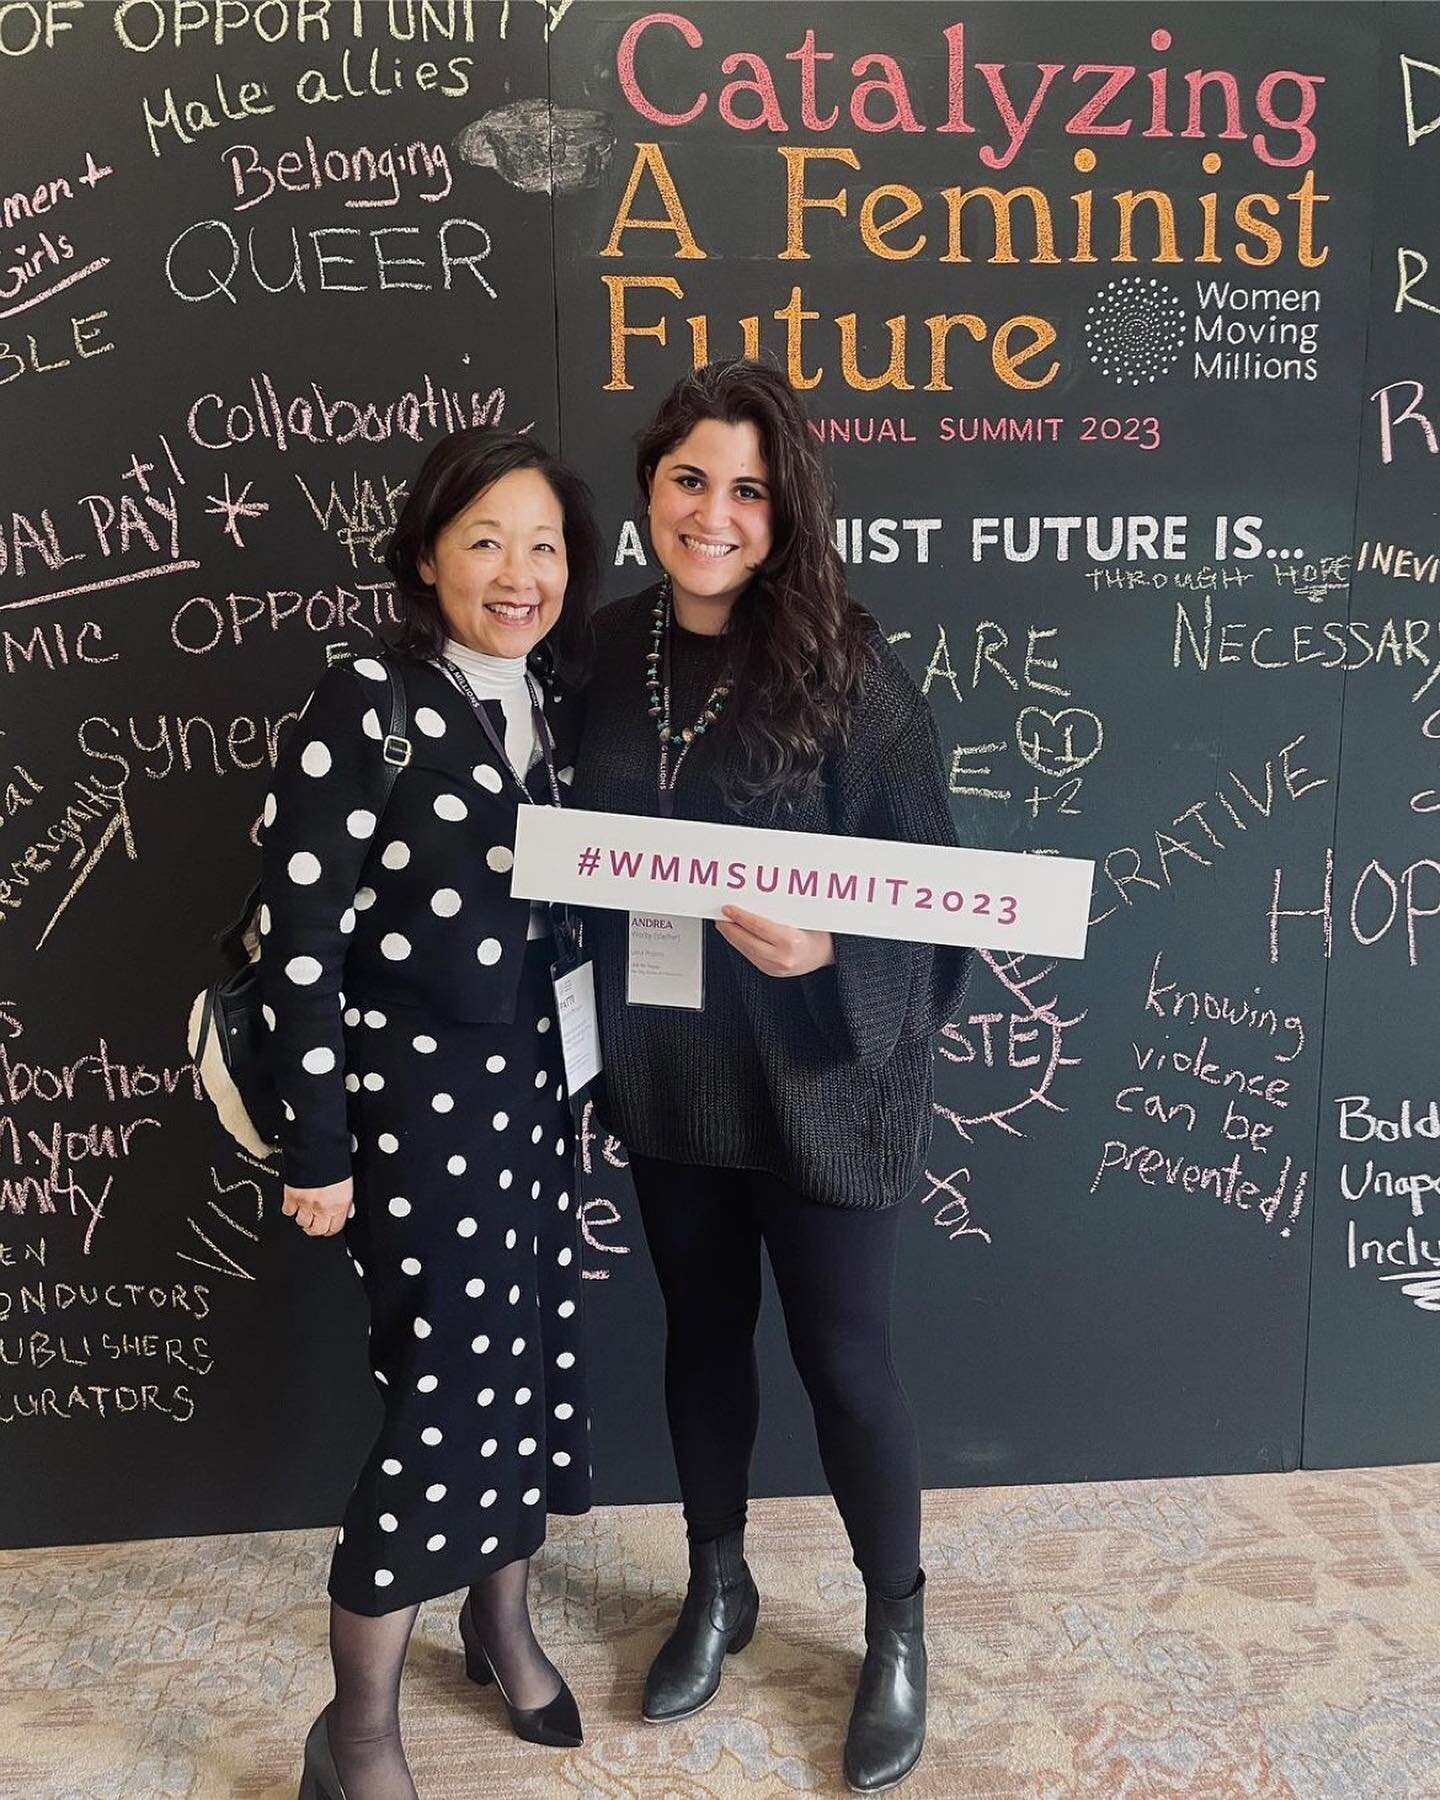 So proud of my girl @andieworby !!!! 
Repost from @andieworby
&bull;
WOW. What an incredible few days among a diverse group of strong, passionate, and brilliant women.

I&rsquo;m so humbled to participate in these conversations about catalyzing a fem